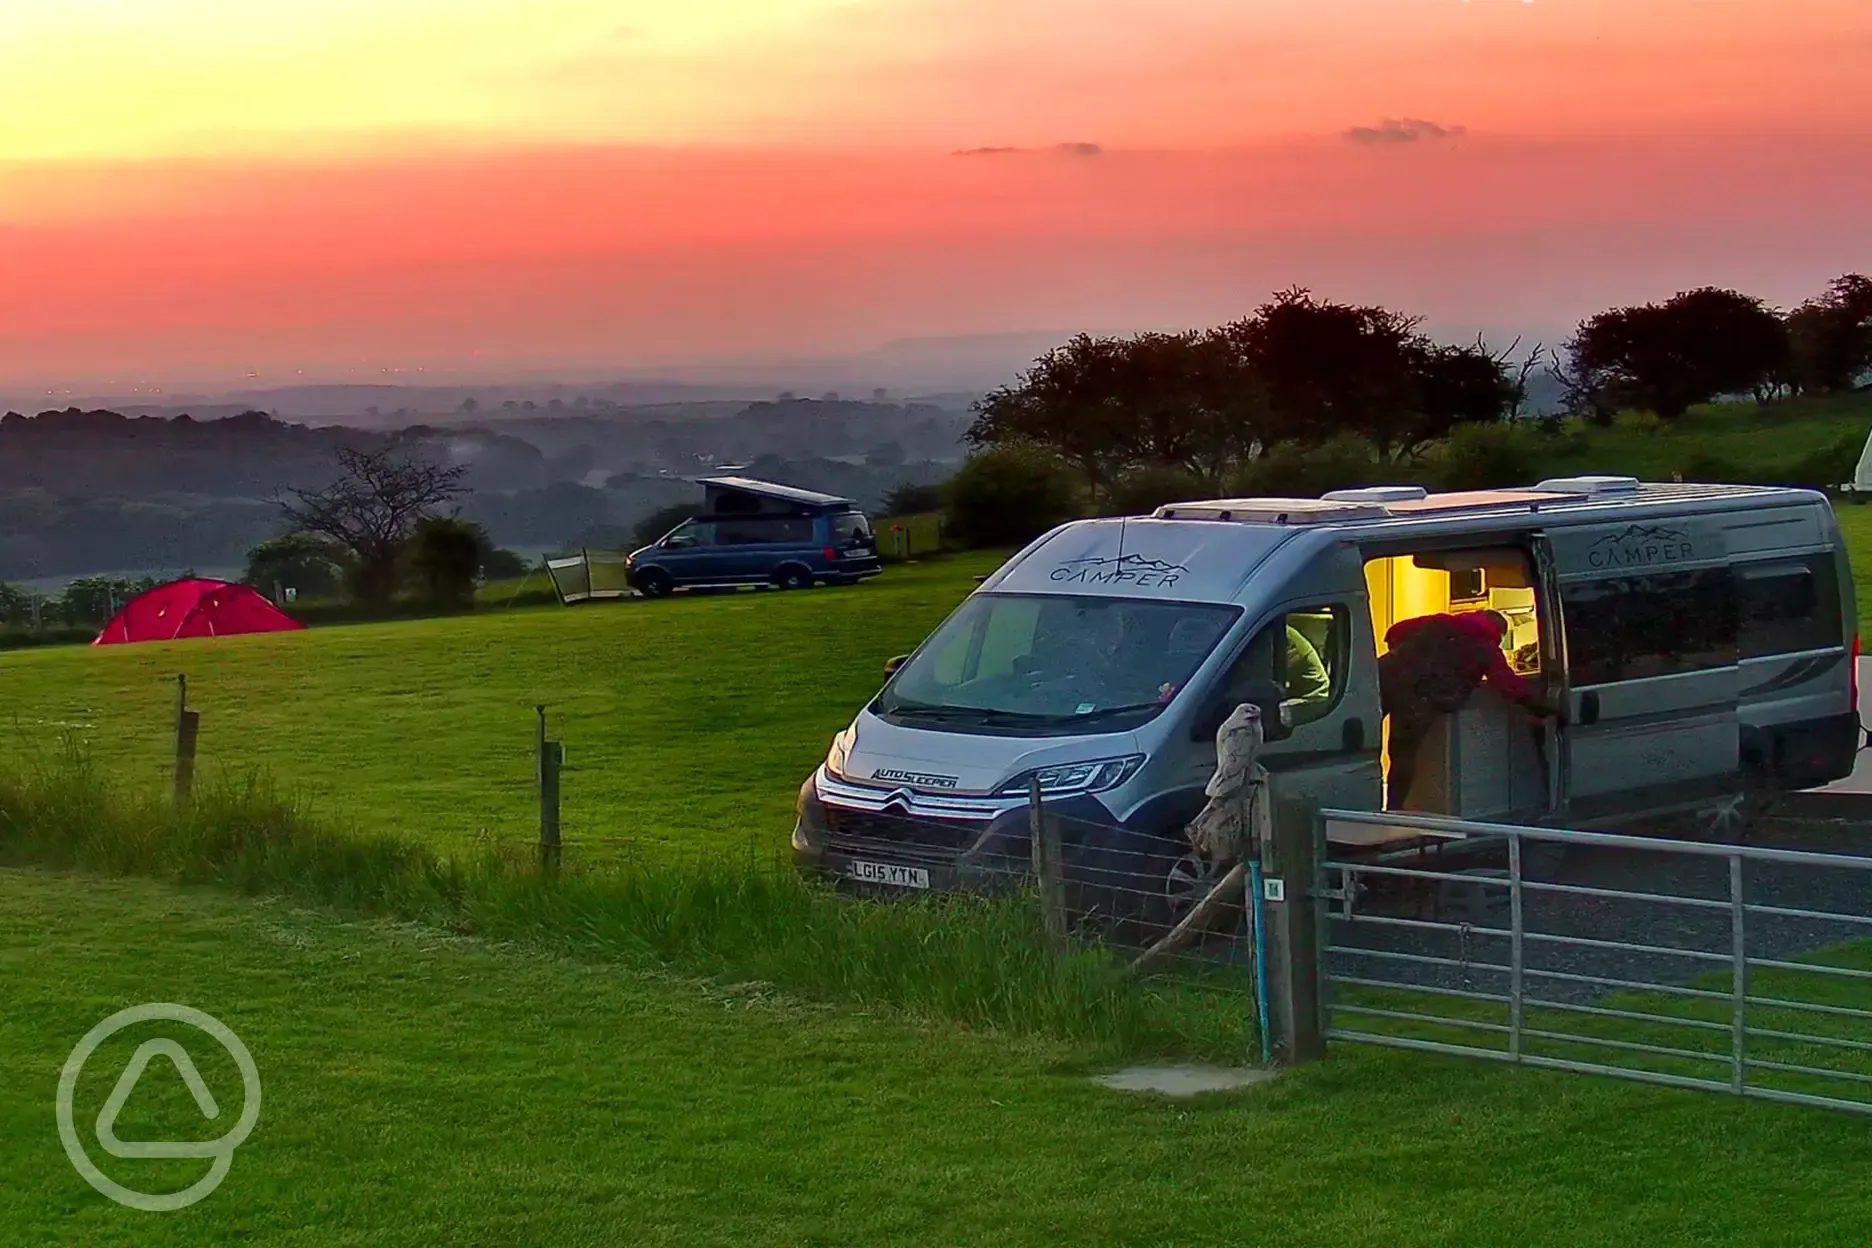 LWB Campervan on Hardstanding with sunset view